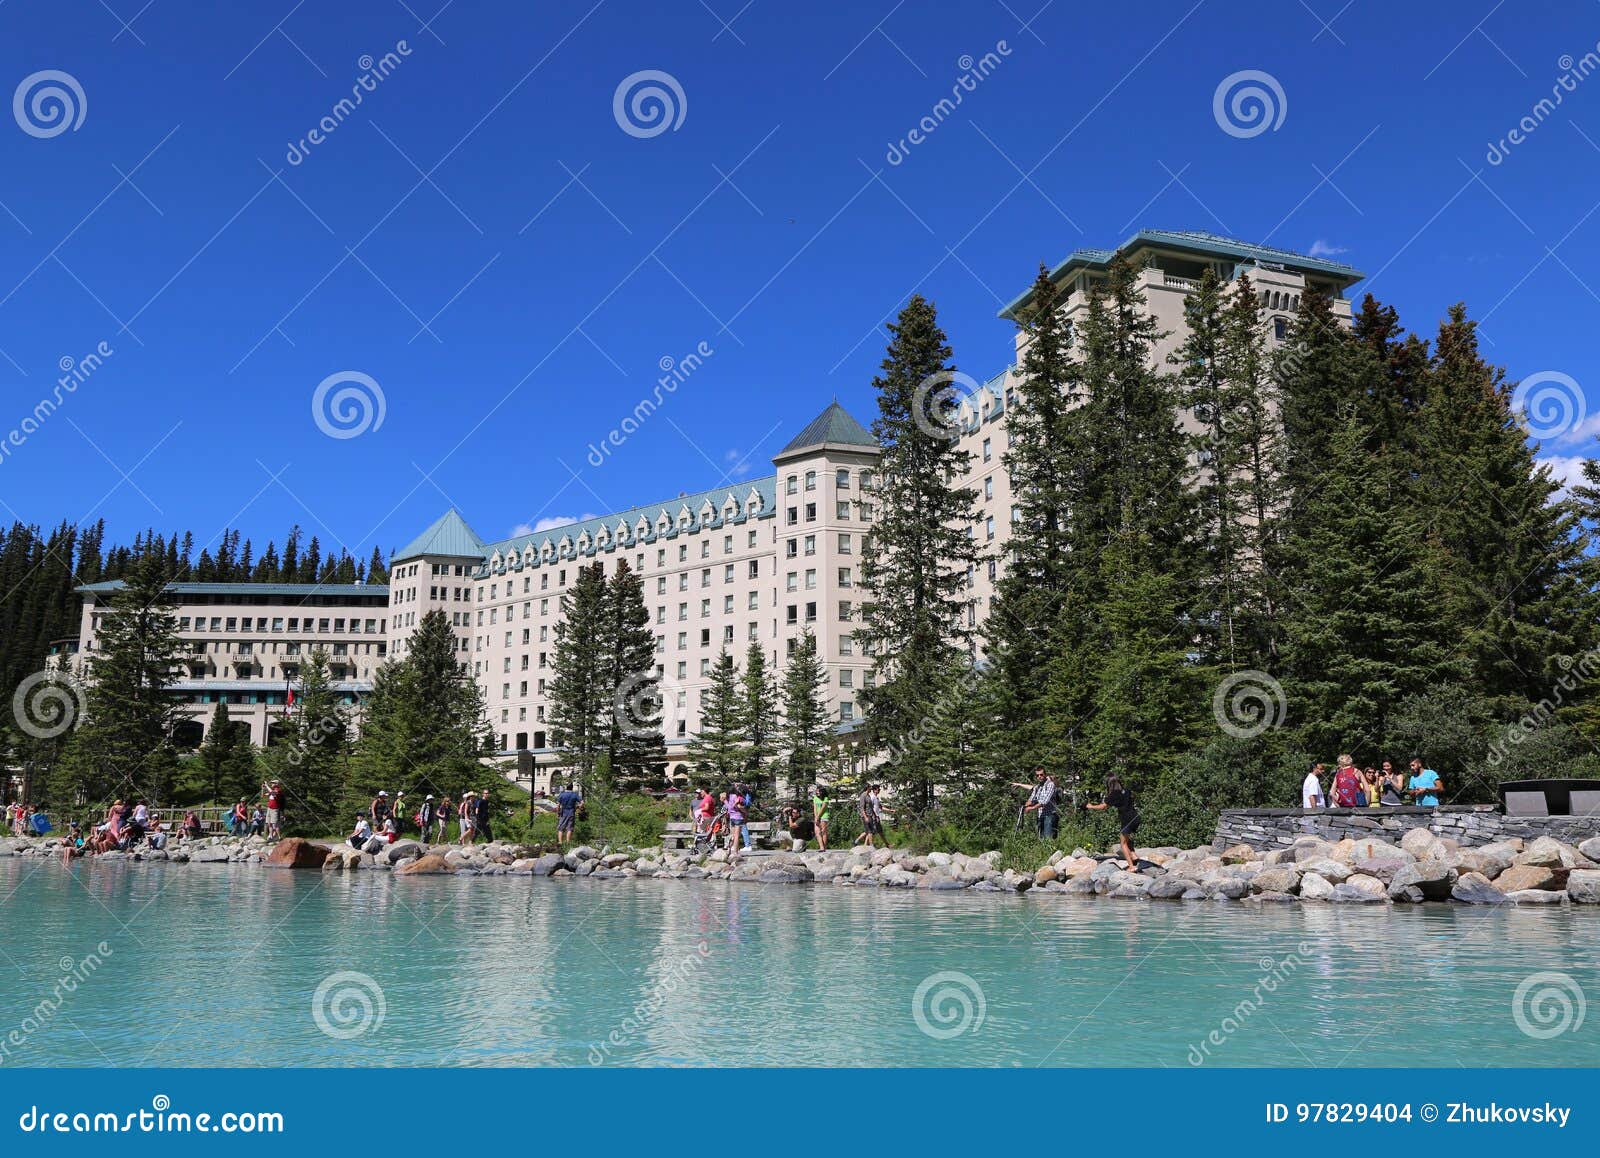 View Of The Famous Fairmont Chateau Lake Louise Hotel Editorial Stock Image - Image of ecology ...